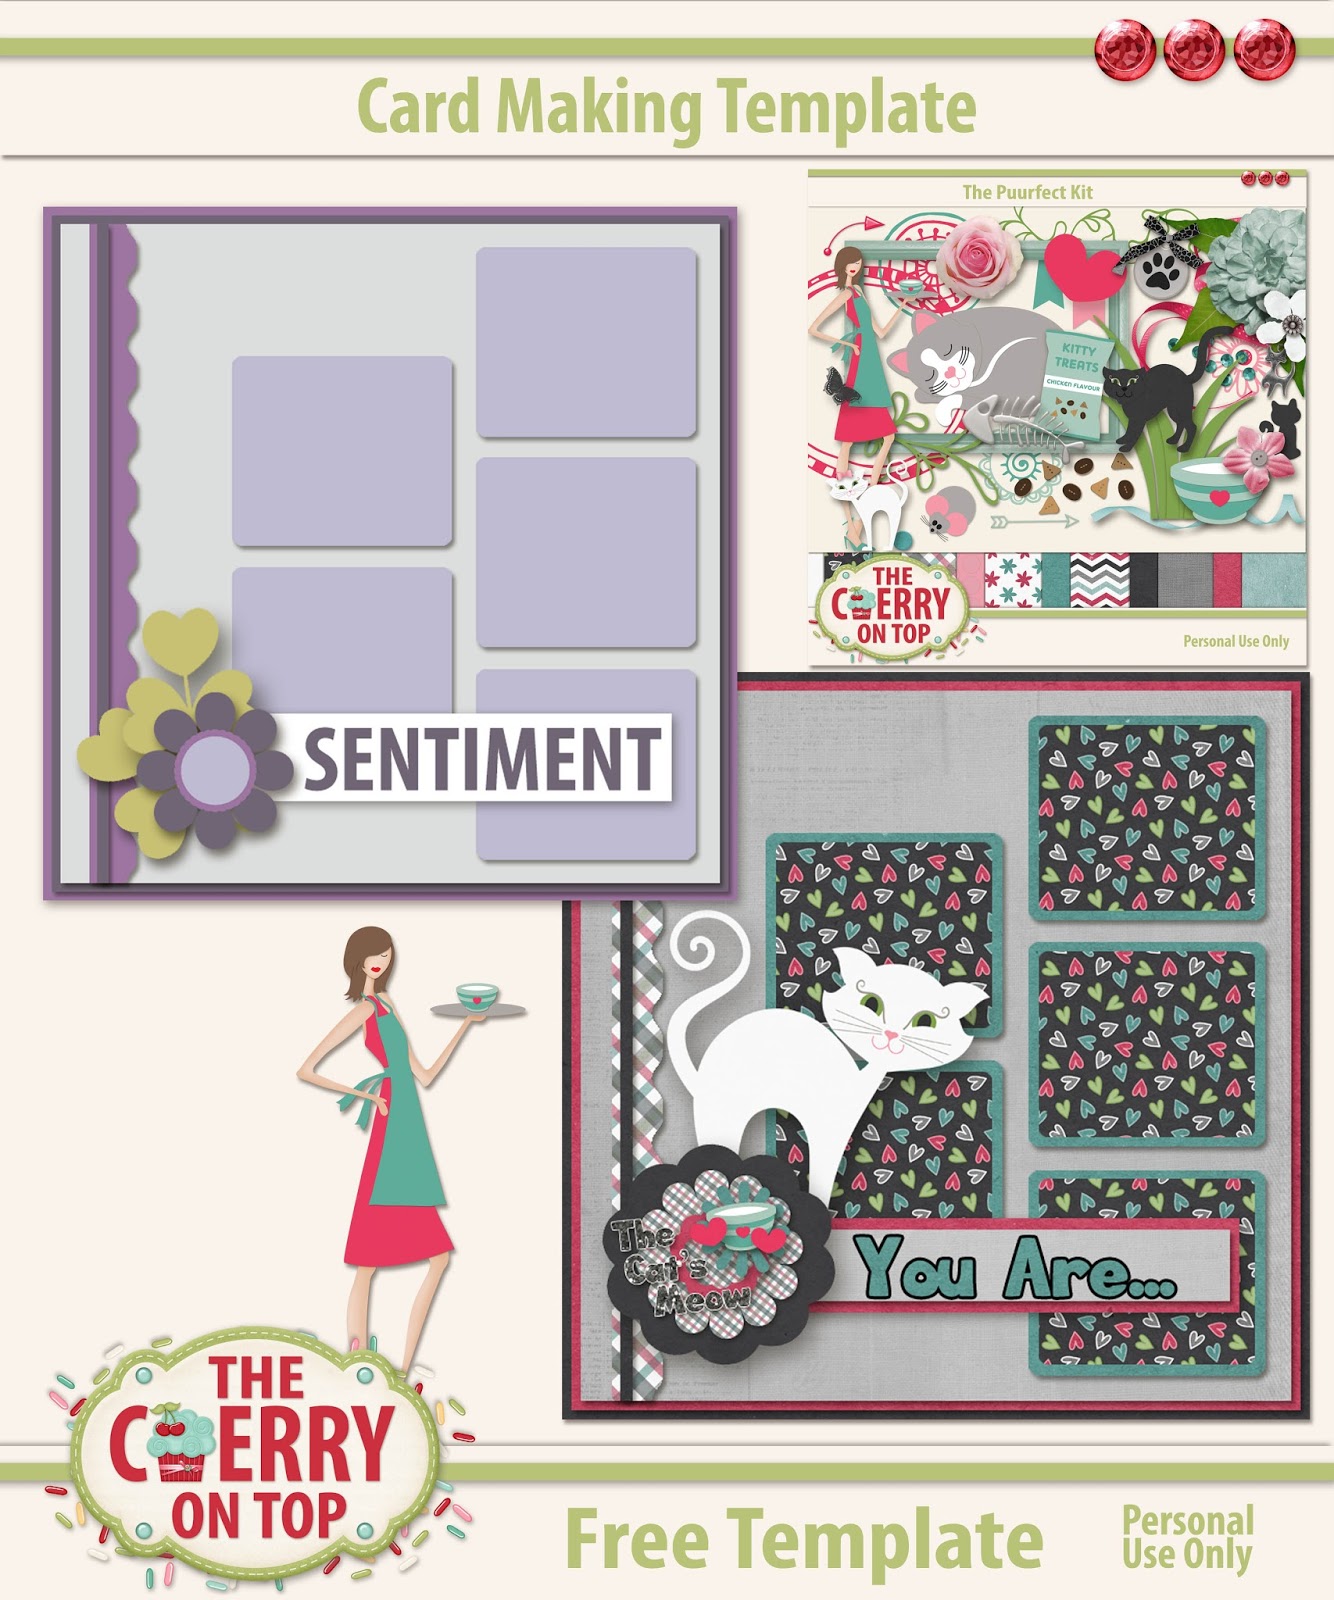 the-cherry-on-top-free-card-making-template